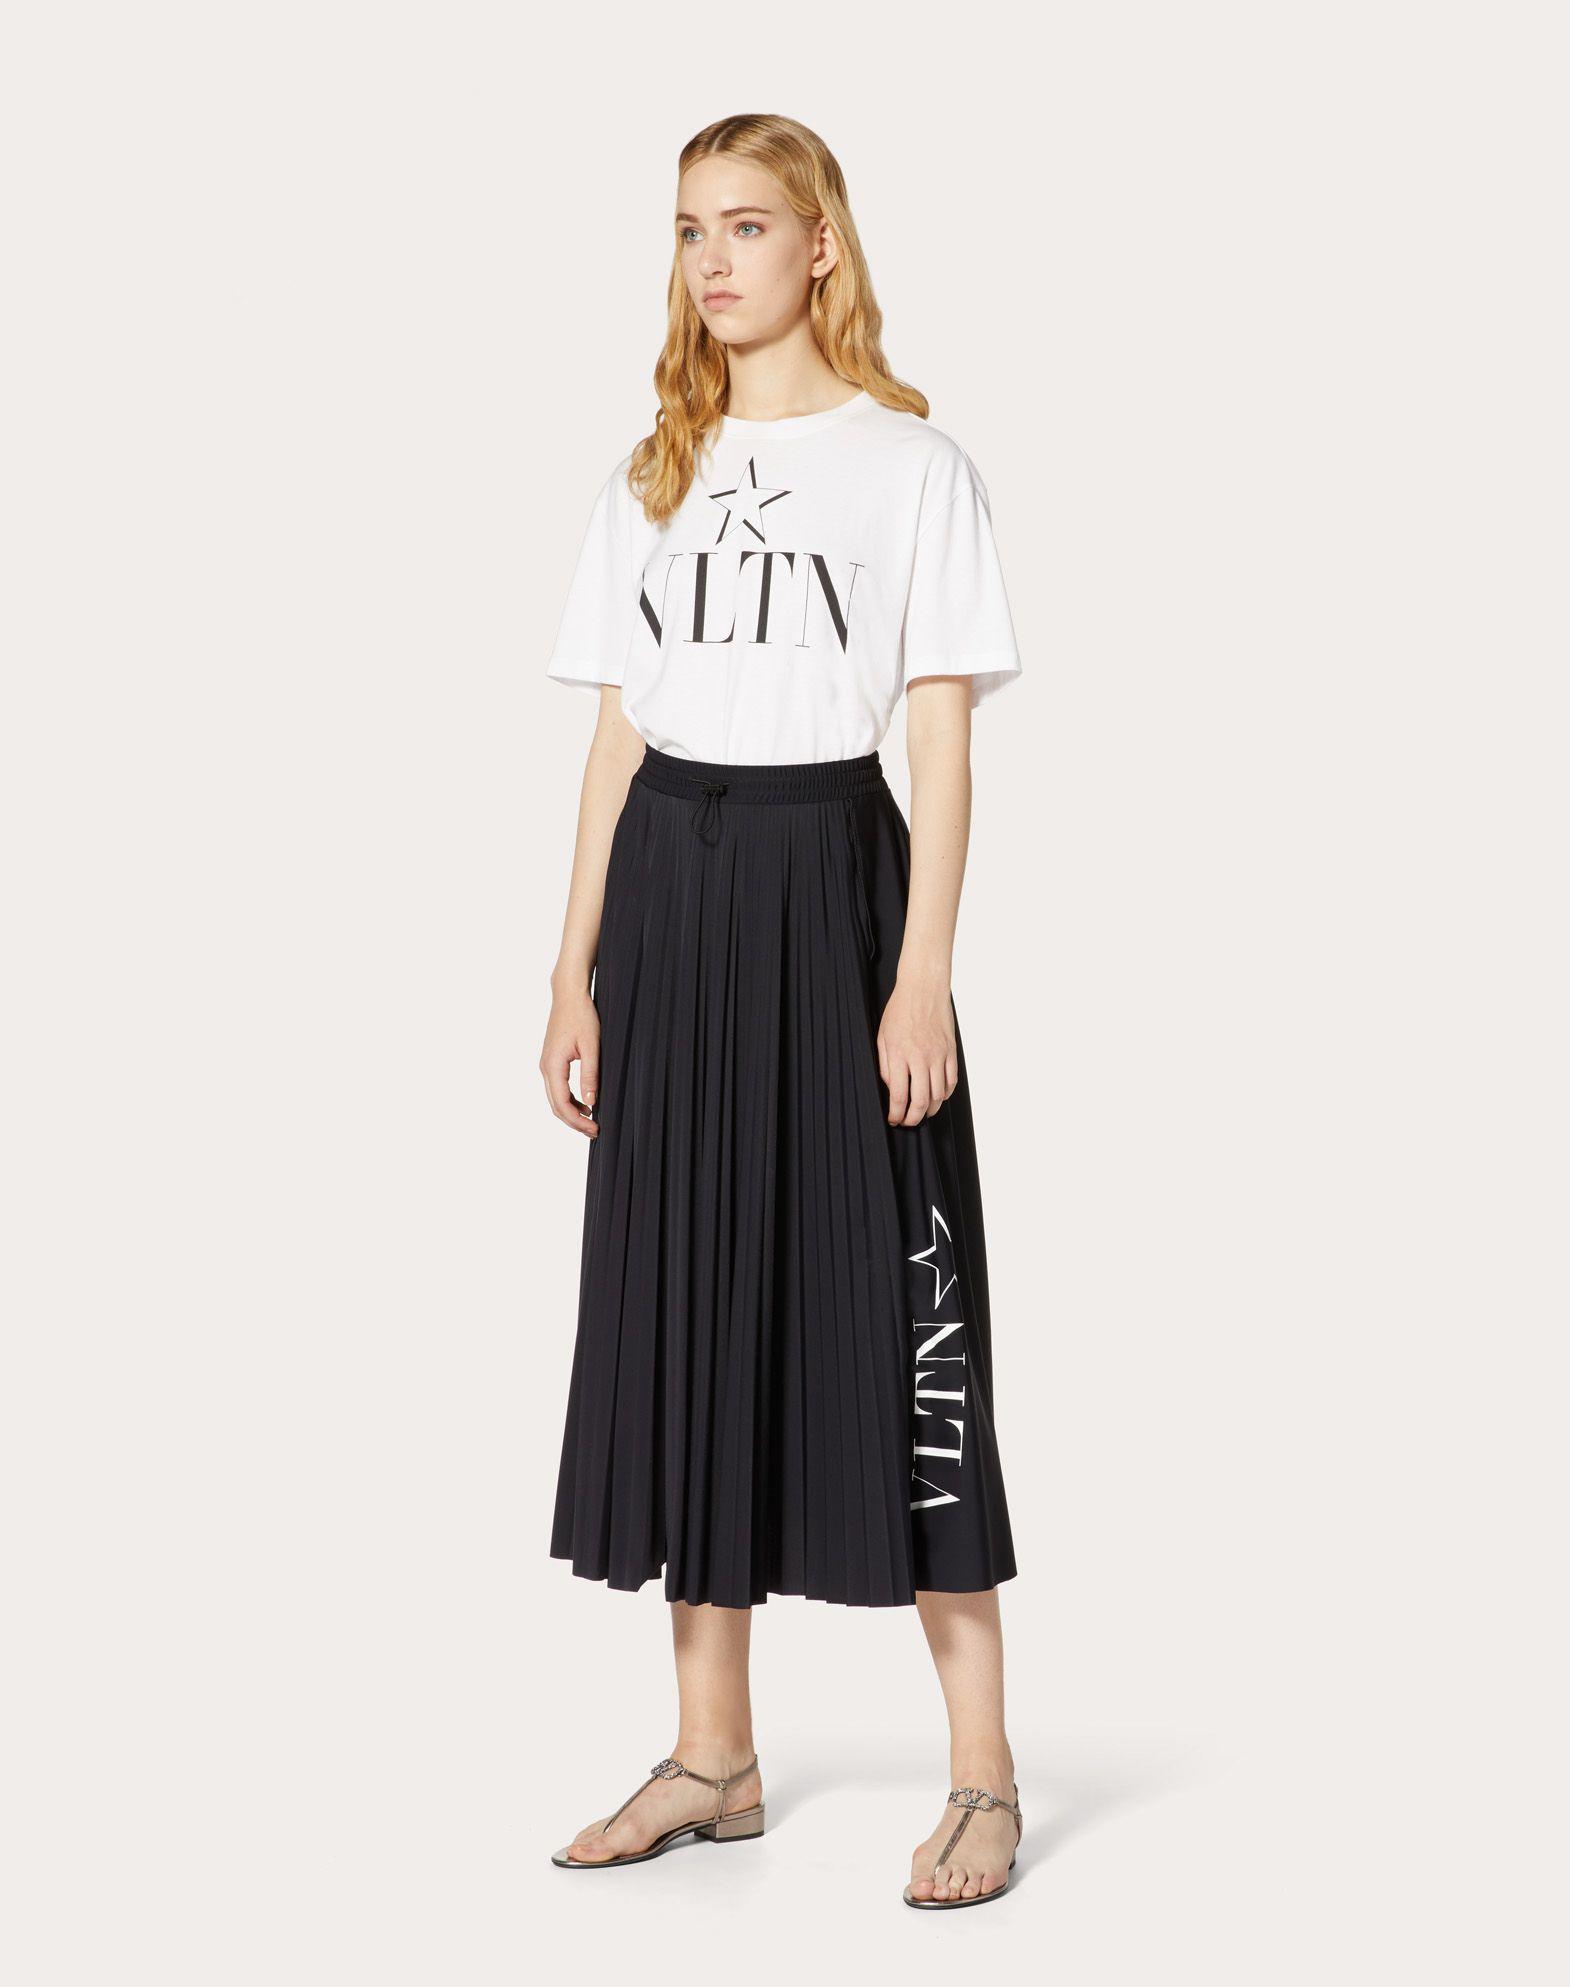 Pleated Jersey With Vltnstar Print in Black | Lyst